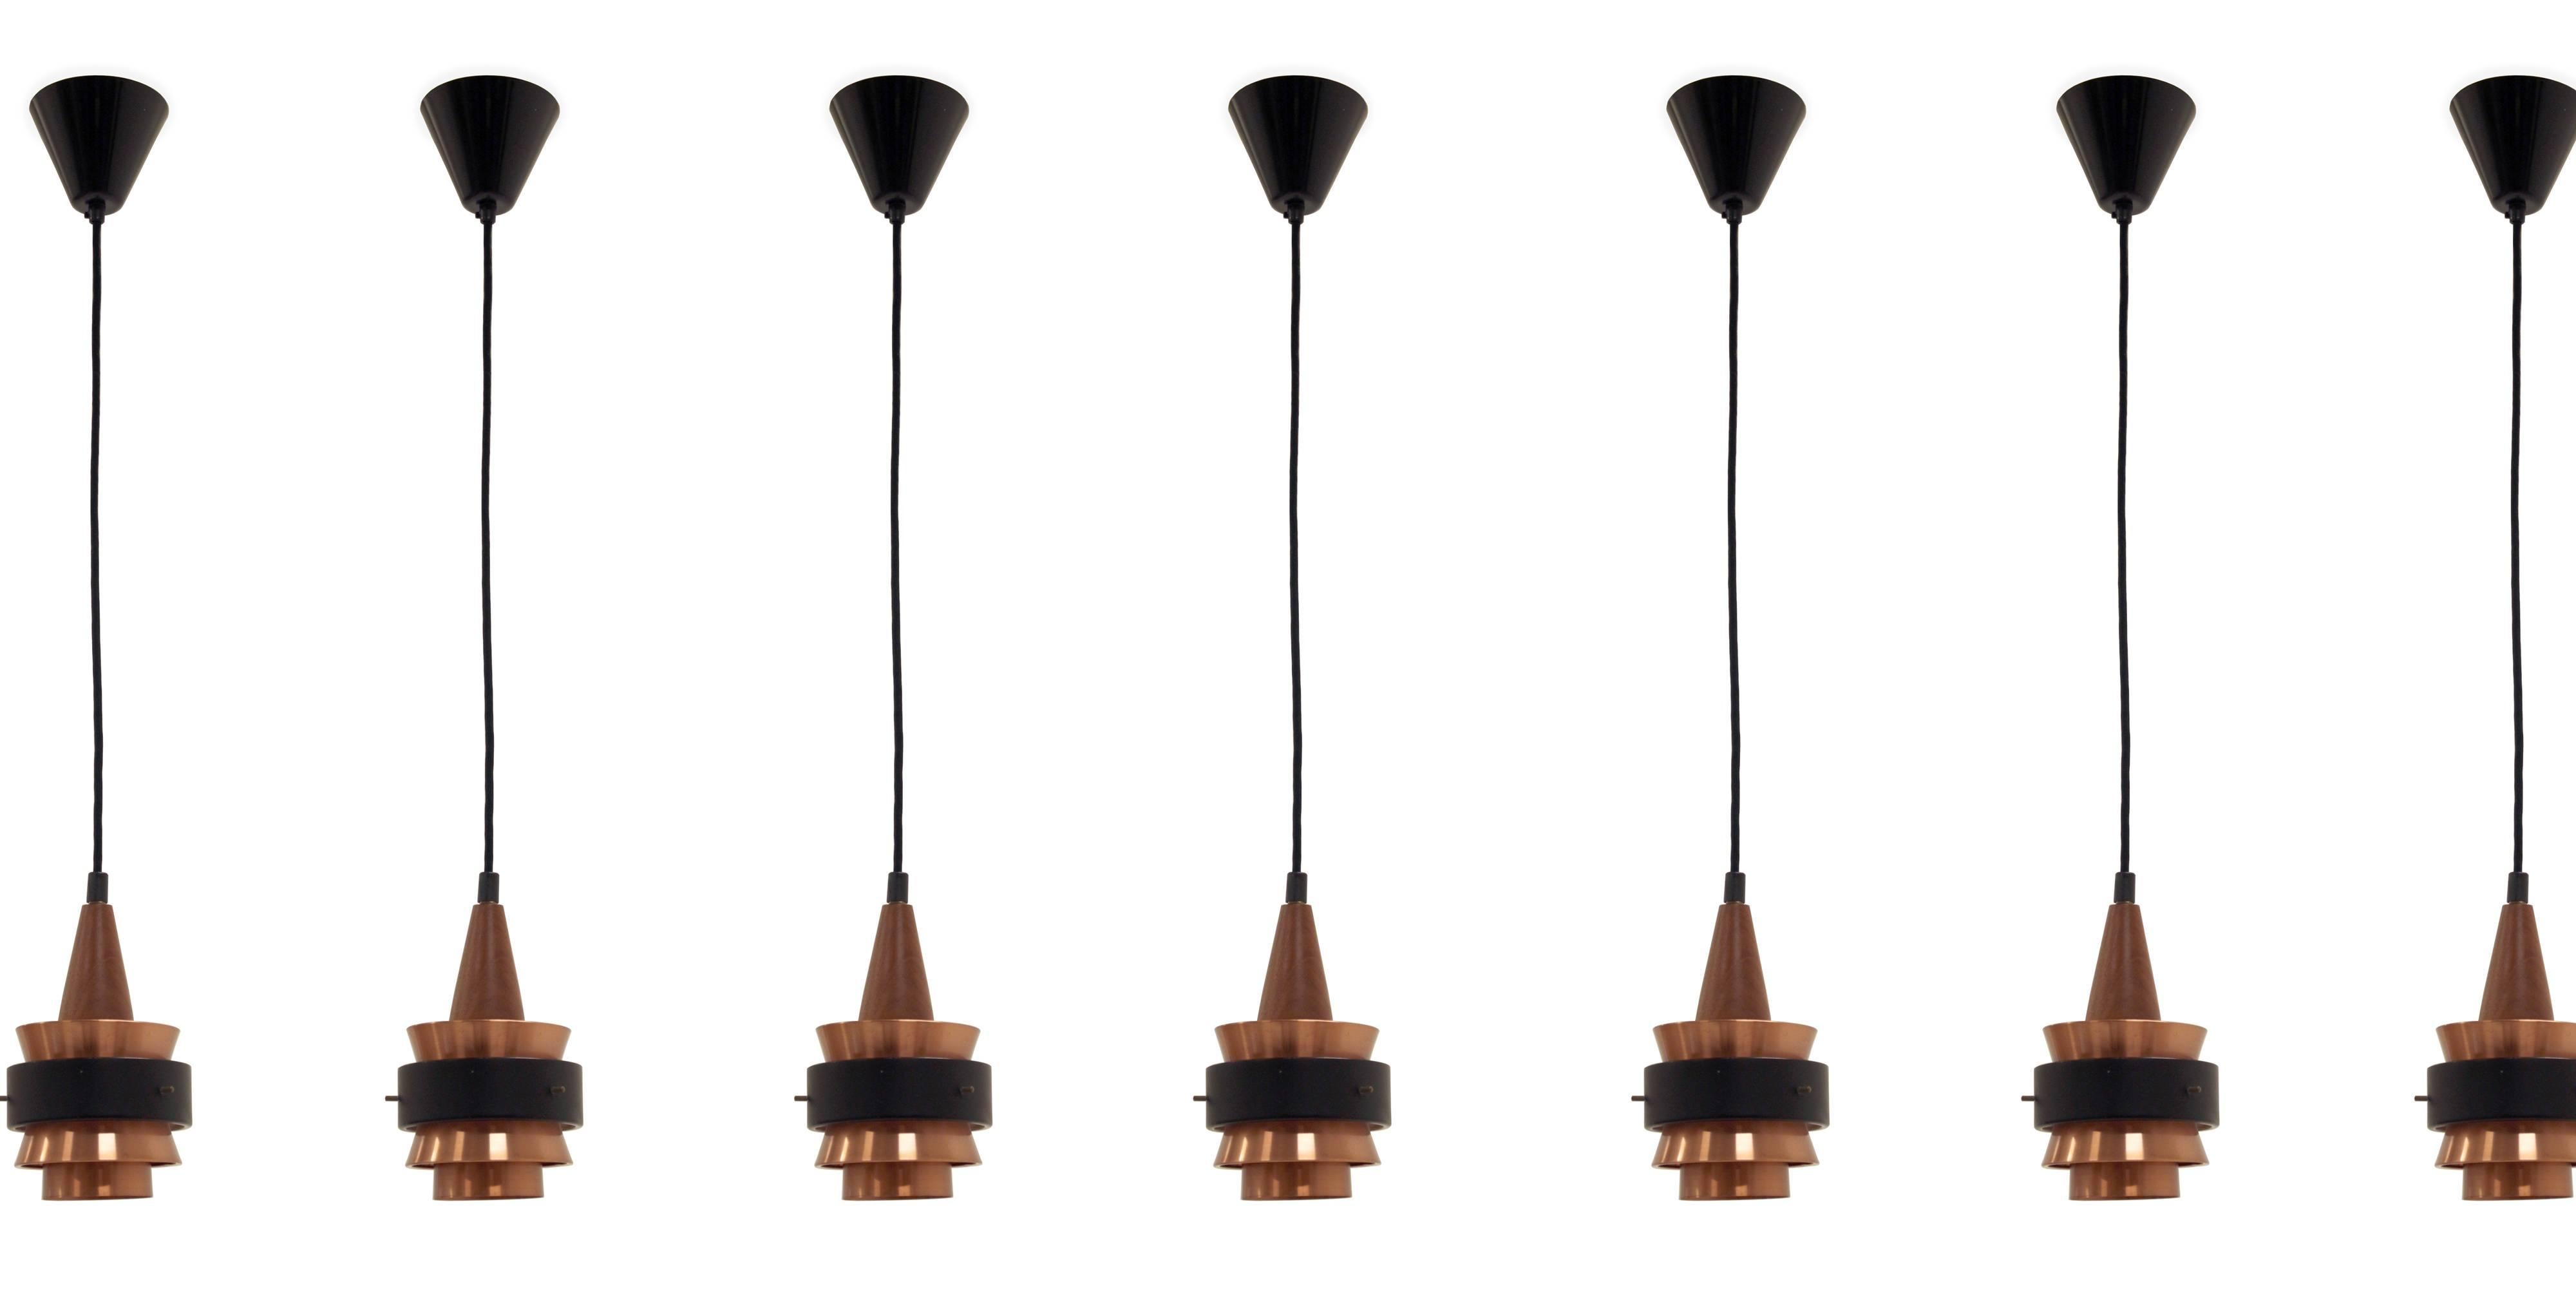 Wonderful ceiling pendants in painted steel and copper. Designed and made in Norway from circa 1960s second half. All pendants are fully working and in excellent vintage condition.